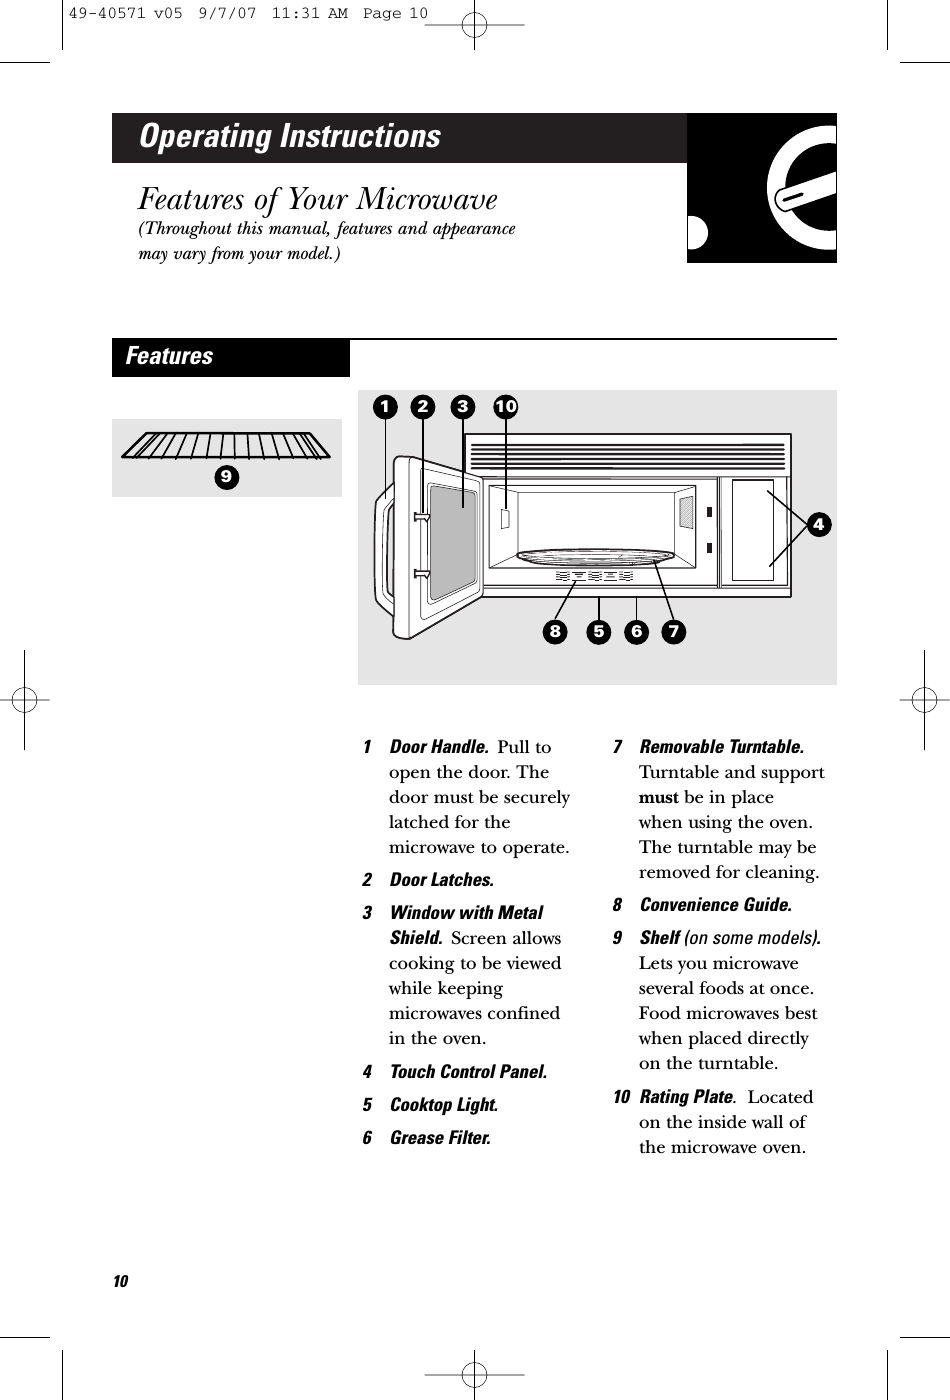 Operating InstructionsFeatures of Your Microwave(Throughout this manual, features and appearancemay vary from your model.)1 Door Handle.  Pull toopen the door. Thedoor must be securelylatched for themicrowave to operate.2 Door Latches.3 Window with MetalShield.  Screen allowscooking to be viewedwhile keepingmicrowaves confined in the oven.4 Touch Control Panel. 5 Cooktop Light.6 Grease Filter.7 Removable Turntable.Turntable and supportmust be in place when using the oven.The turntable may beremoved for cleaning.8 Convenience Guide.9 Shelf (on some models).Lets you microwaveseveral foods at once.Food microwaves bestwhen placed directly on the turntable.10 Rating Plate.  Locatedon the inside wall ofthe microwave oven.Features321410958761049-40571 v05  9/7/07  11:31 AM  Page 10